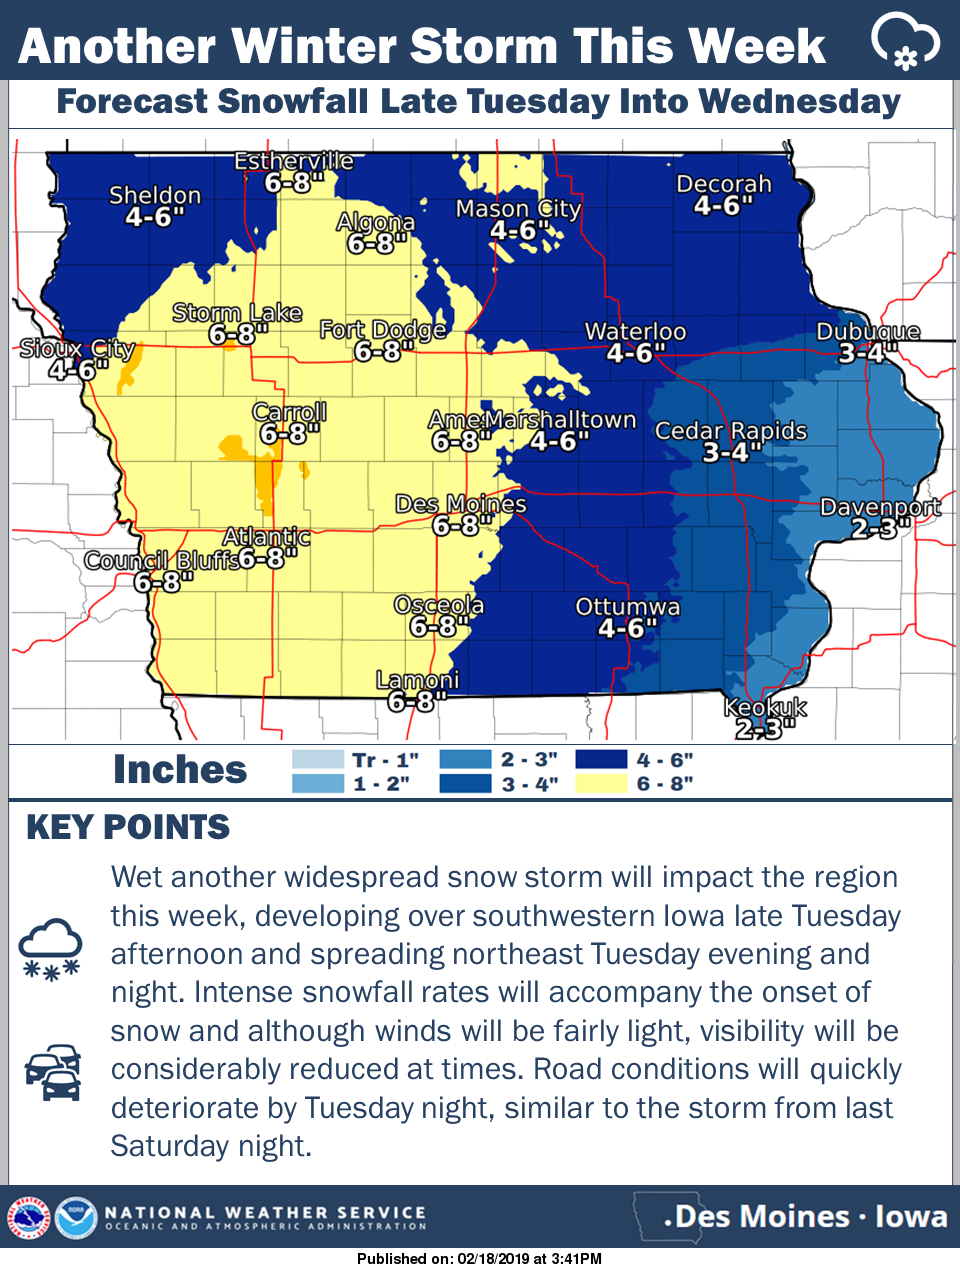 Had enough yet? More snow likely on the way